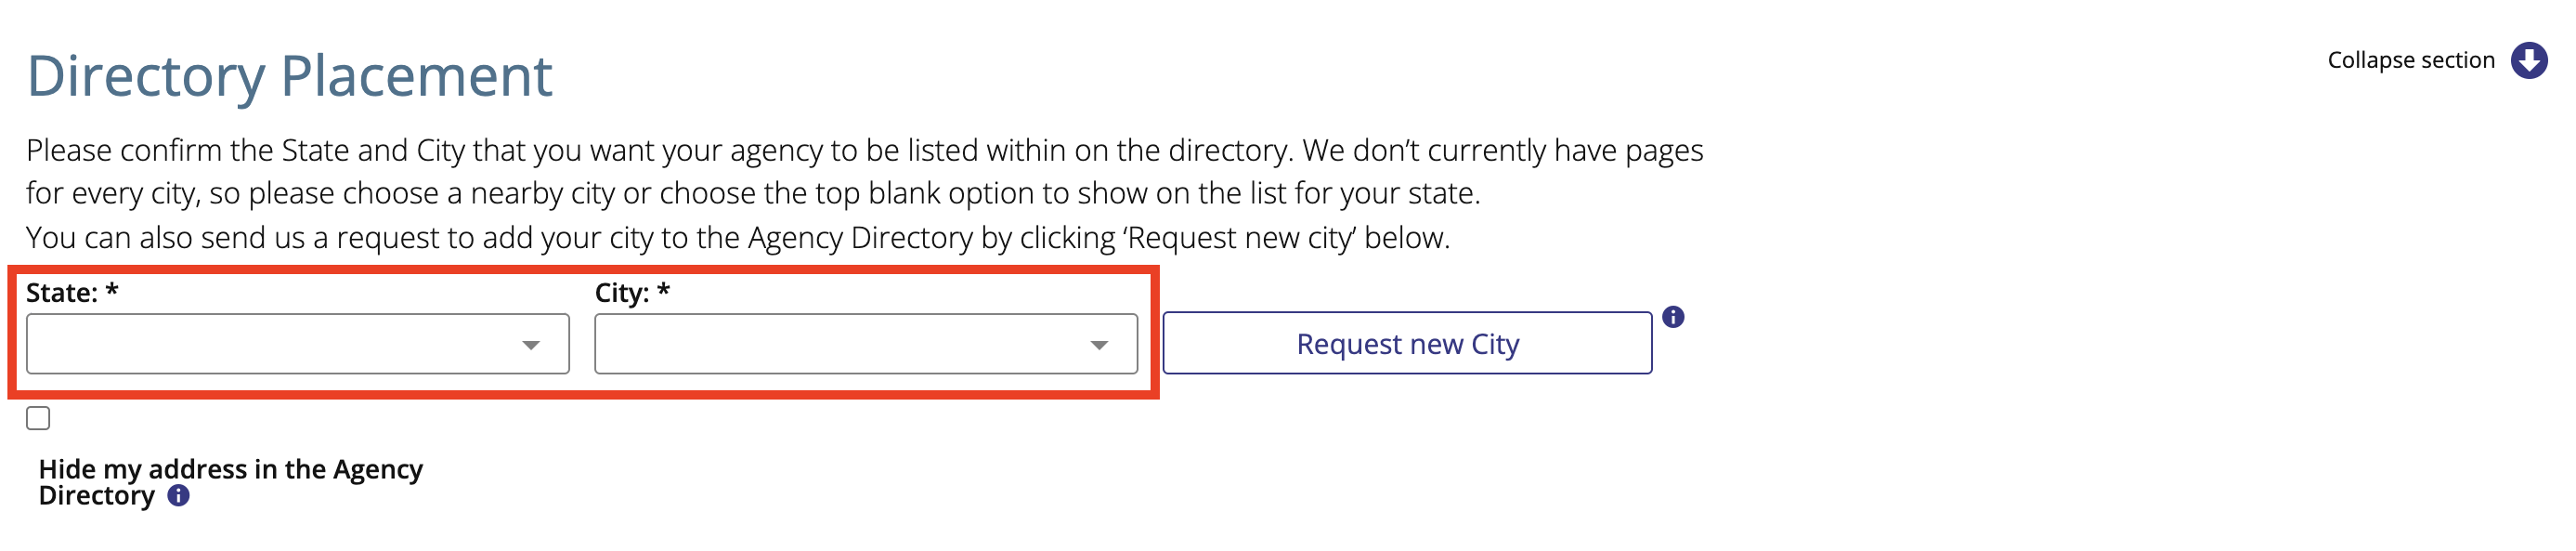 1-What_if_my_city_is_missing_from_Agency_Directory_.png